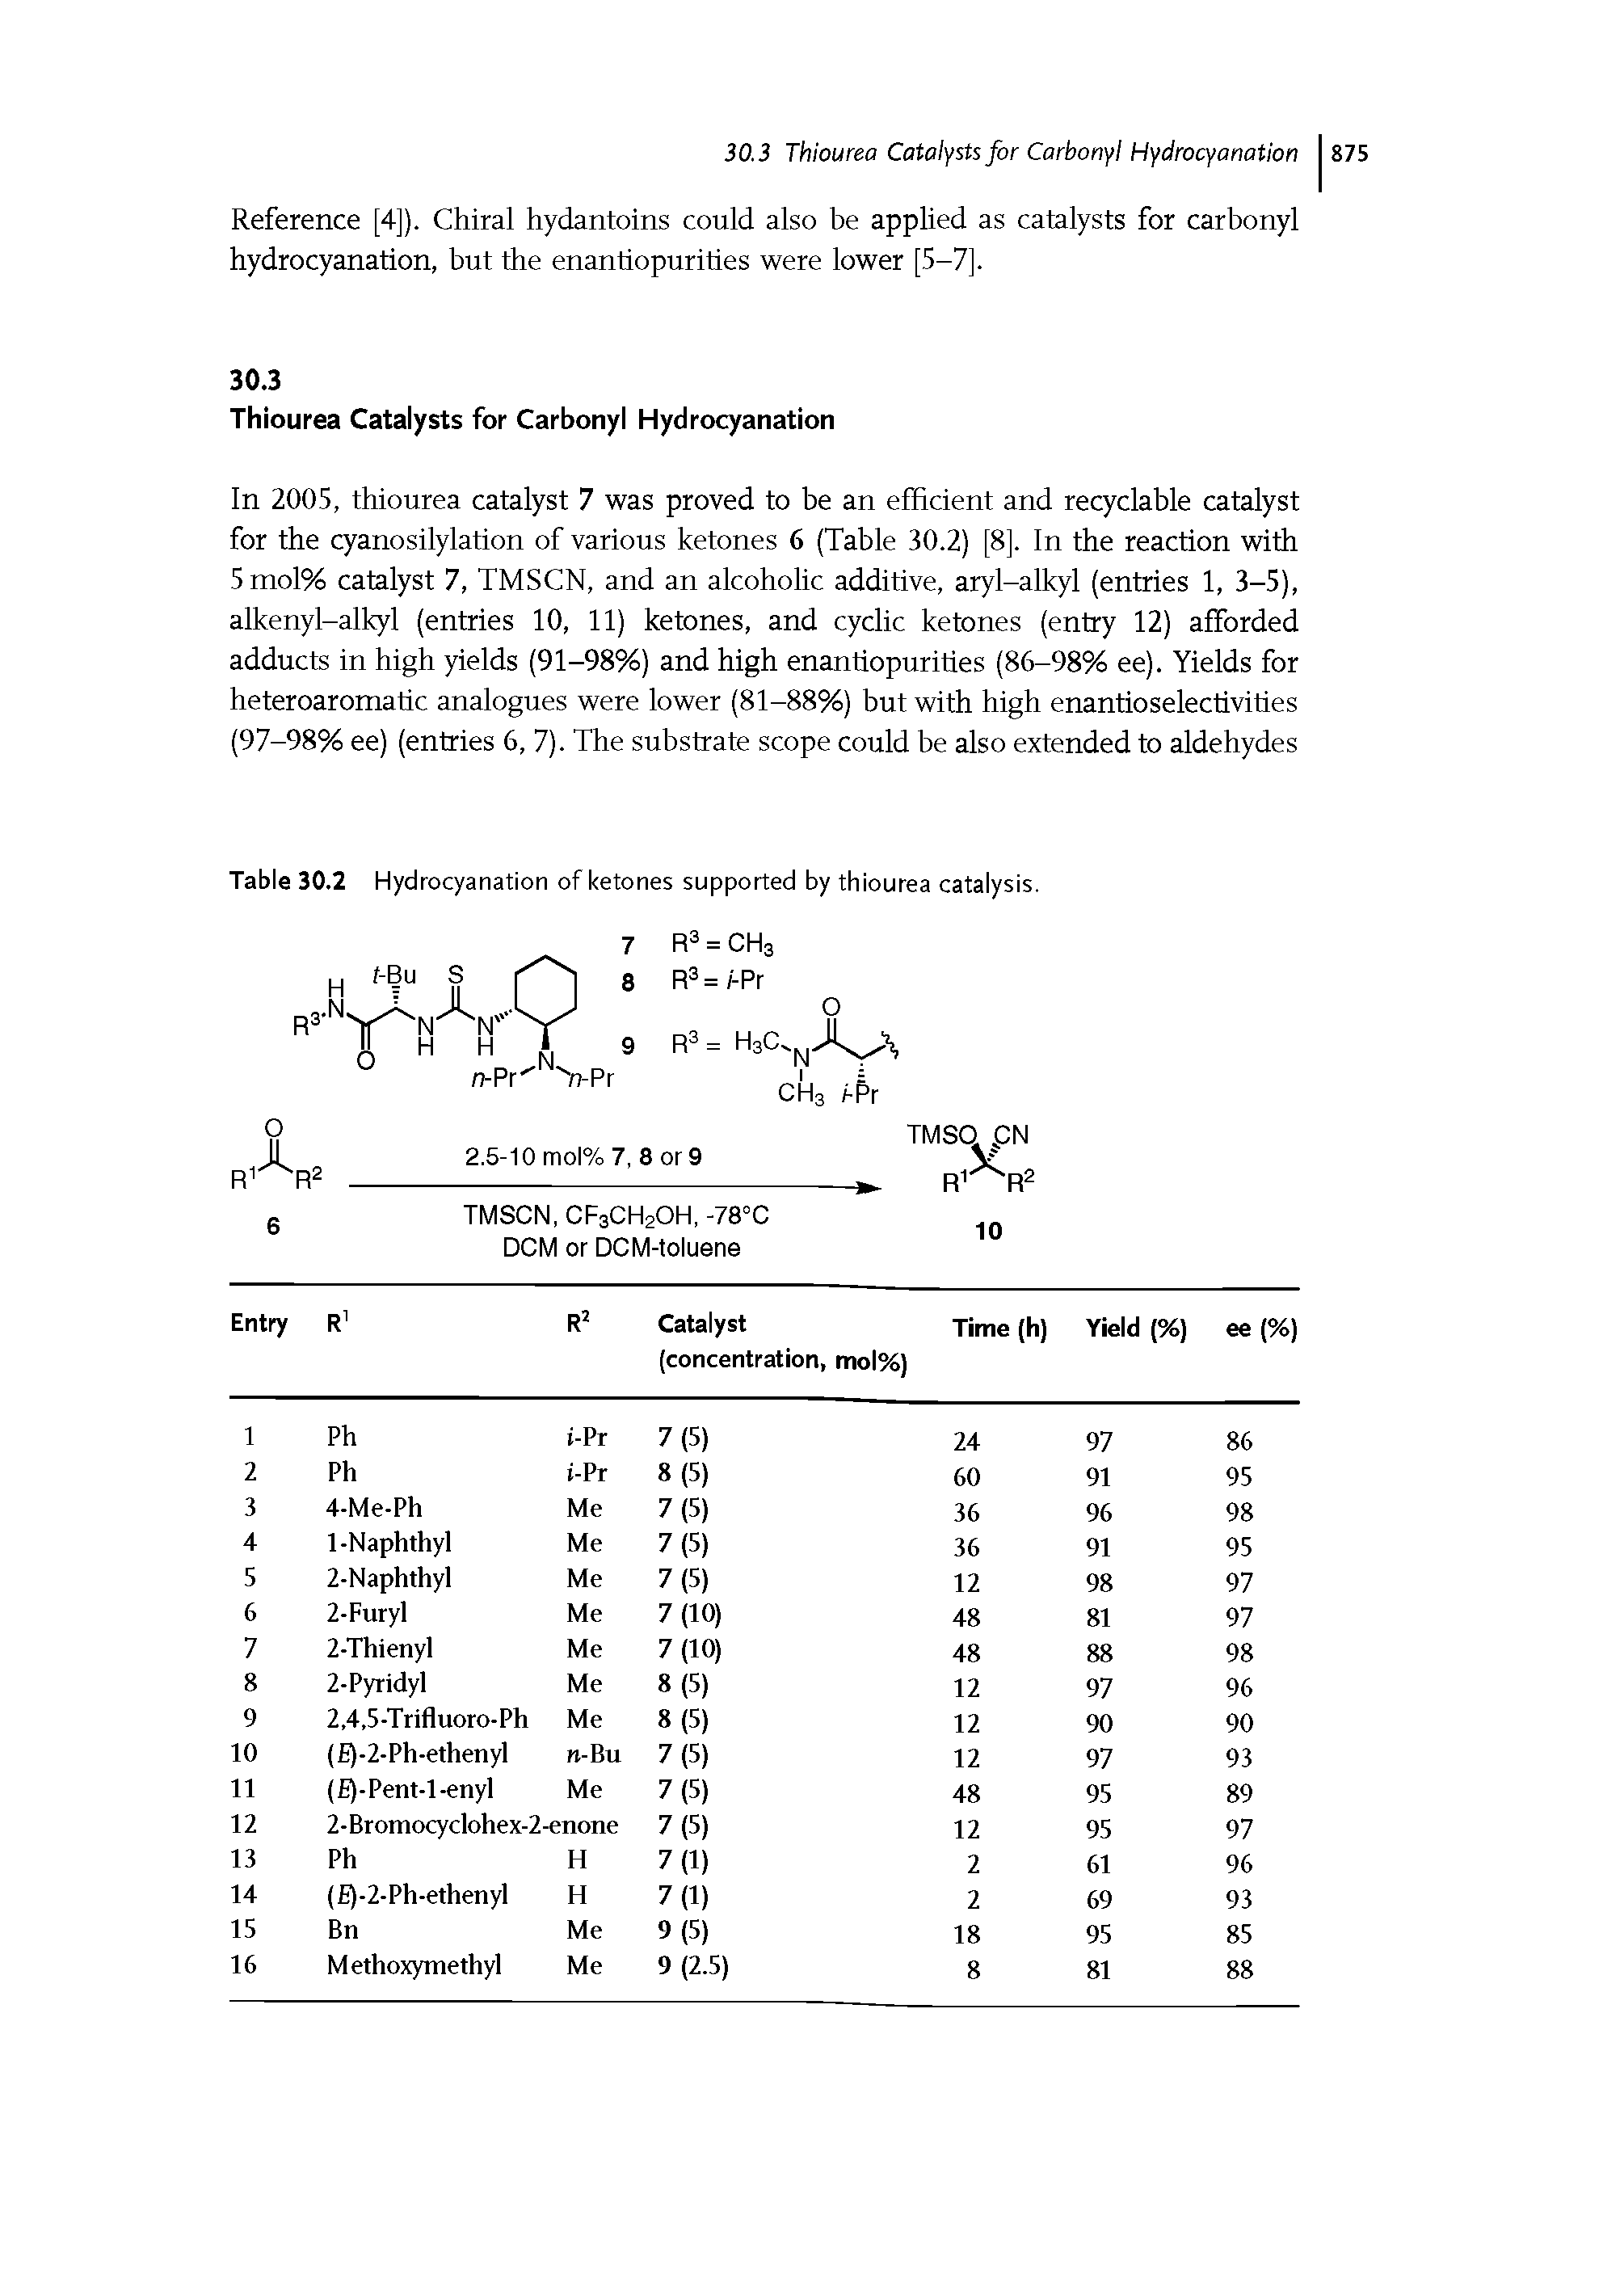 Table 30.2 Hydrocyanation of ketones supported by thiourea catalysis.